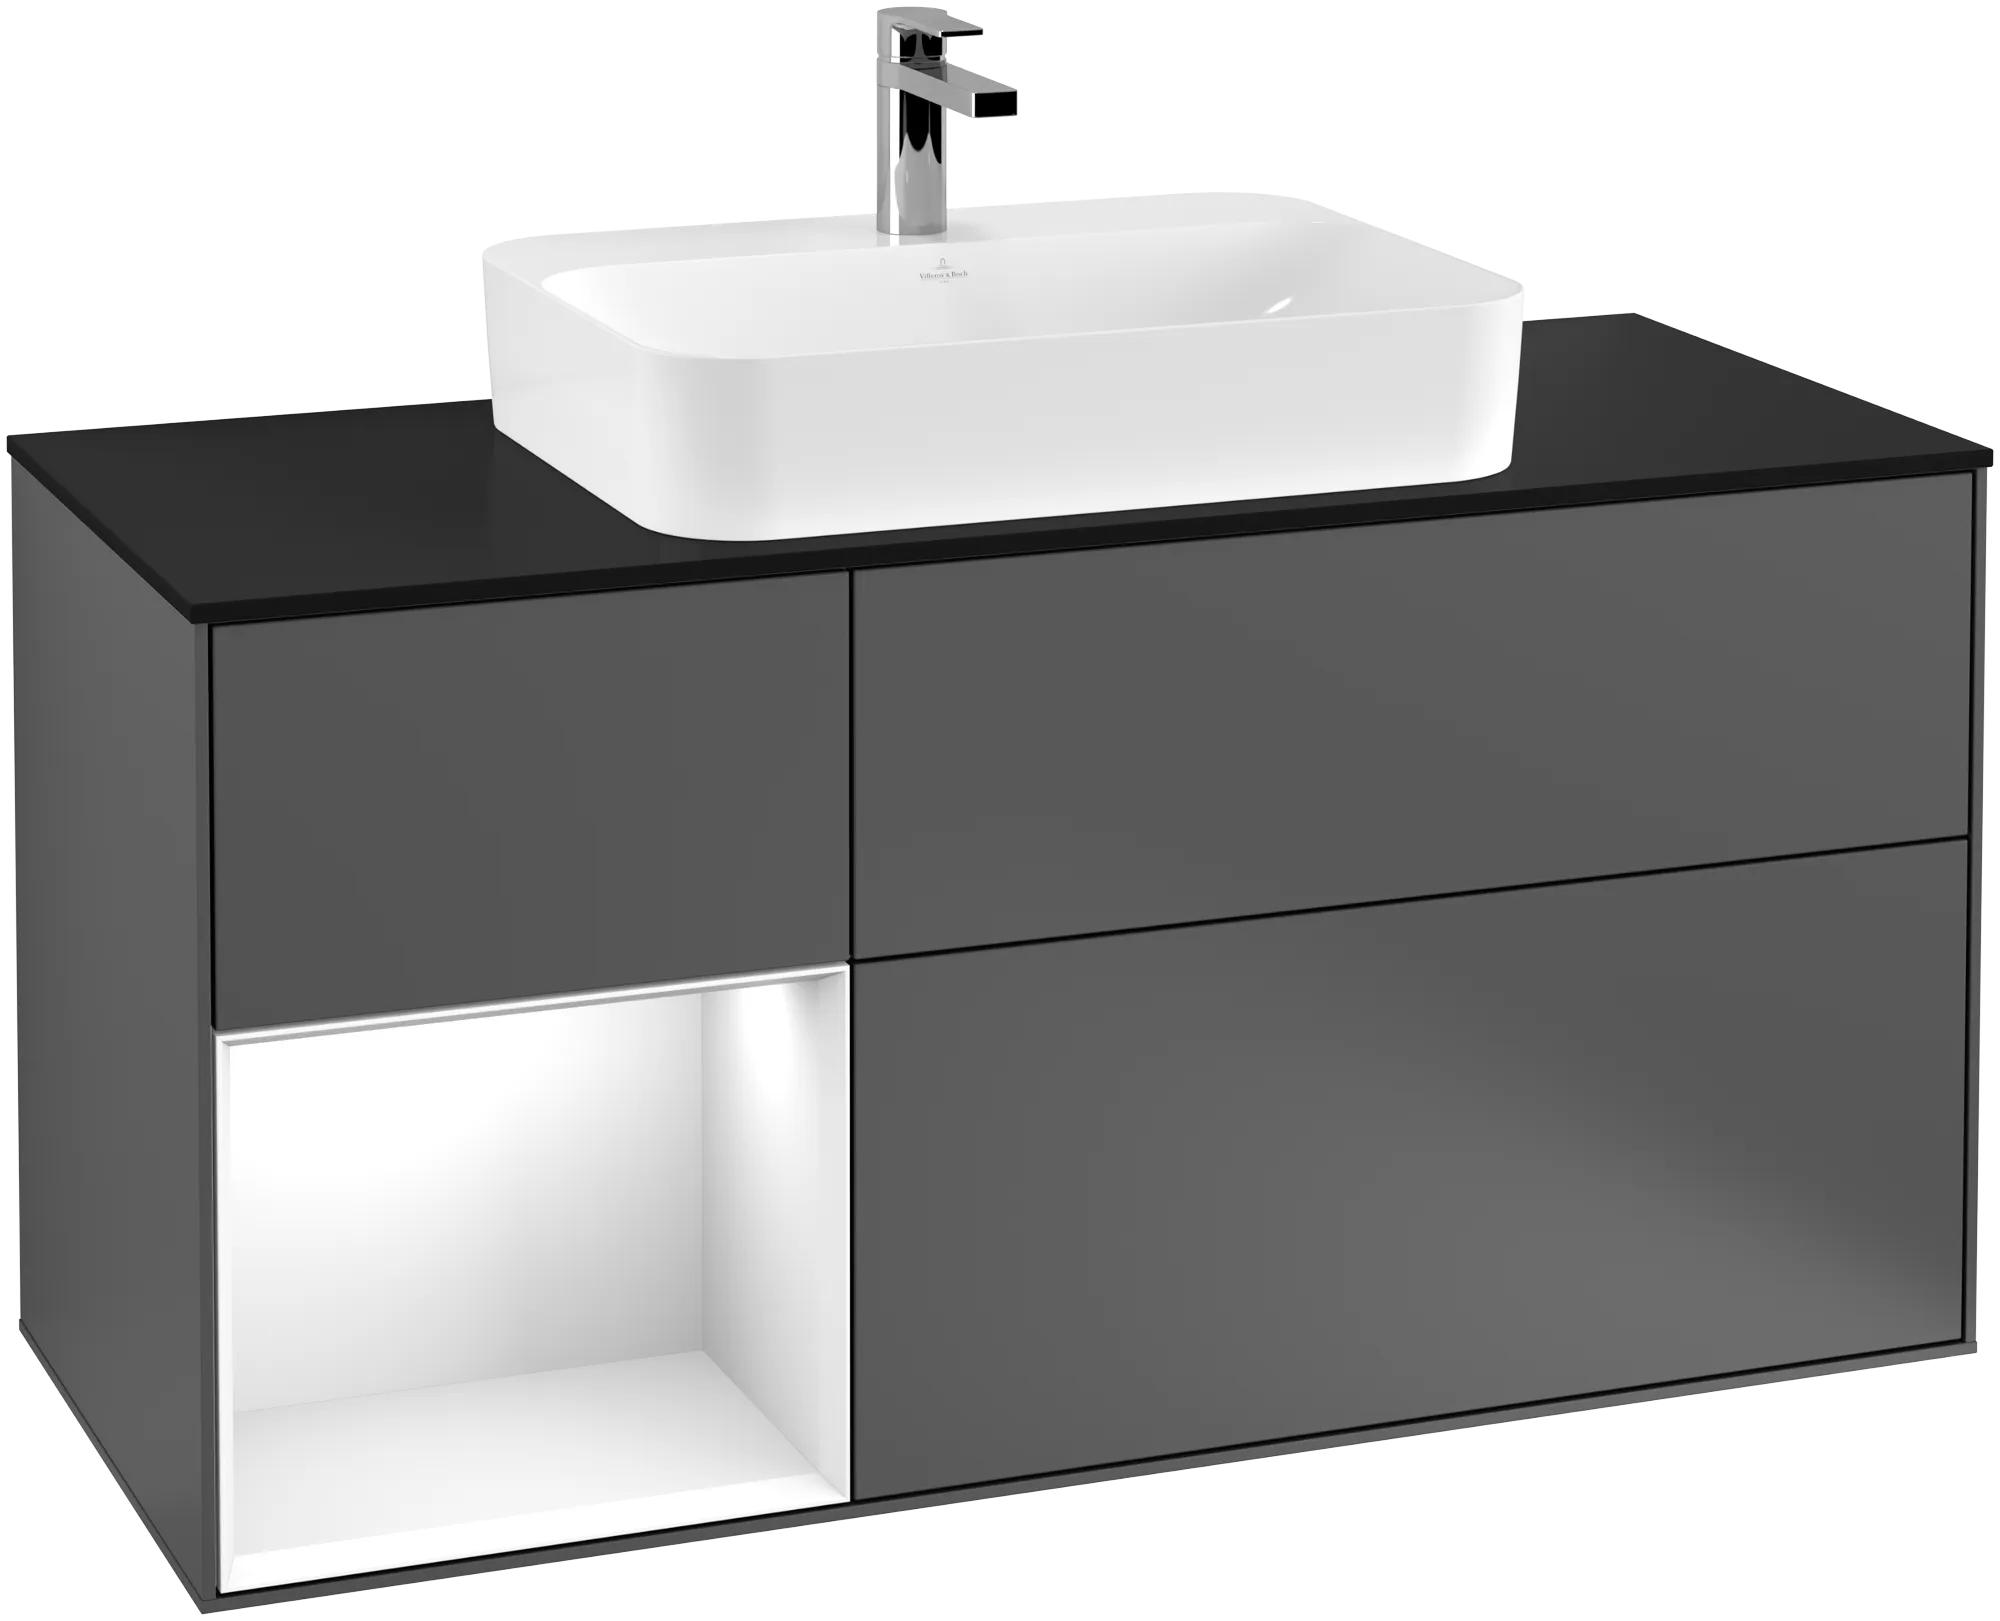 Picture of VILLEROY BOCH Finion Vanity unit, with lighting, 3 pull-out compartments, 1200 x 603 x 501 mm, Anthracite Matt Lacquer / Glossy White Lacquer / Glass Black Matt #G412GFGK